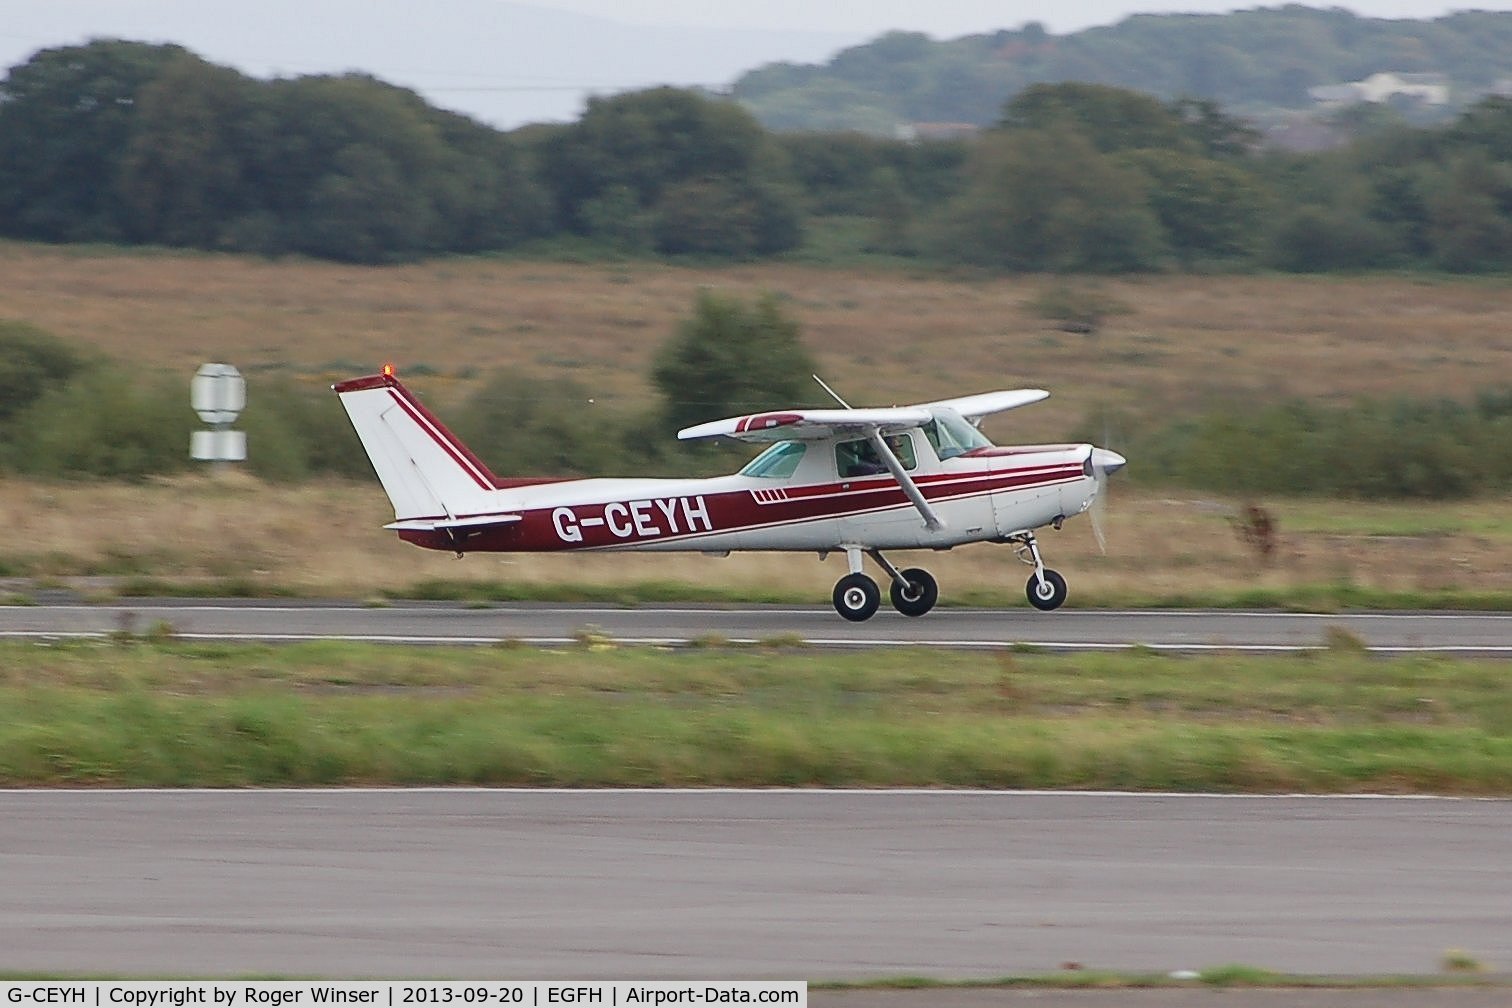 G-CEYH, 1978 Cessna 152 C/N 15282689, Visiting Cessna 152 operated by Cornwall Flying Club. Previously registered N89253.